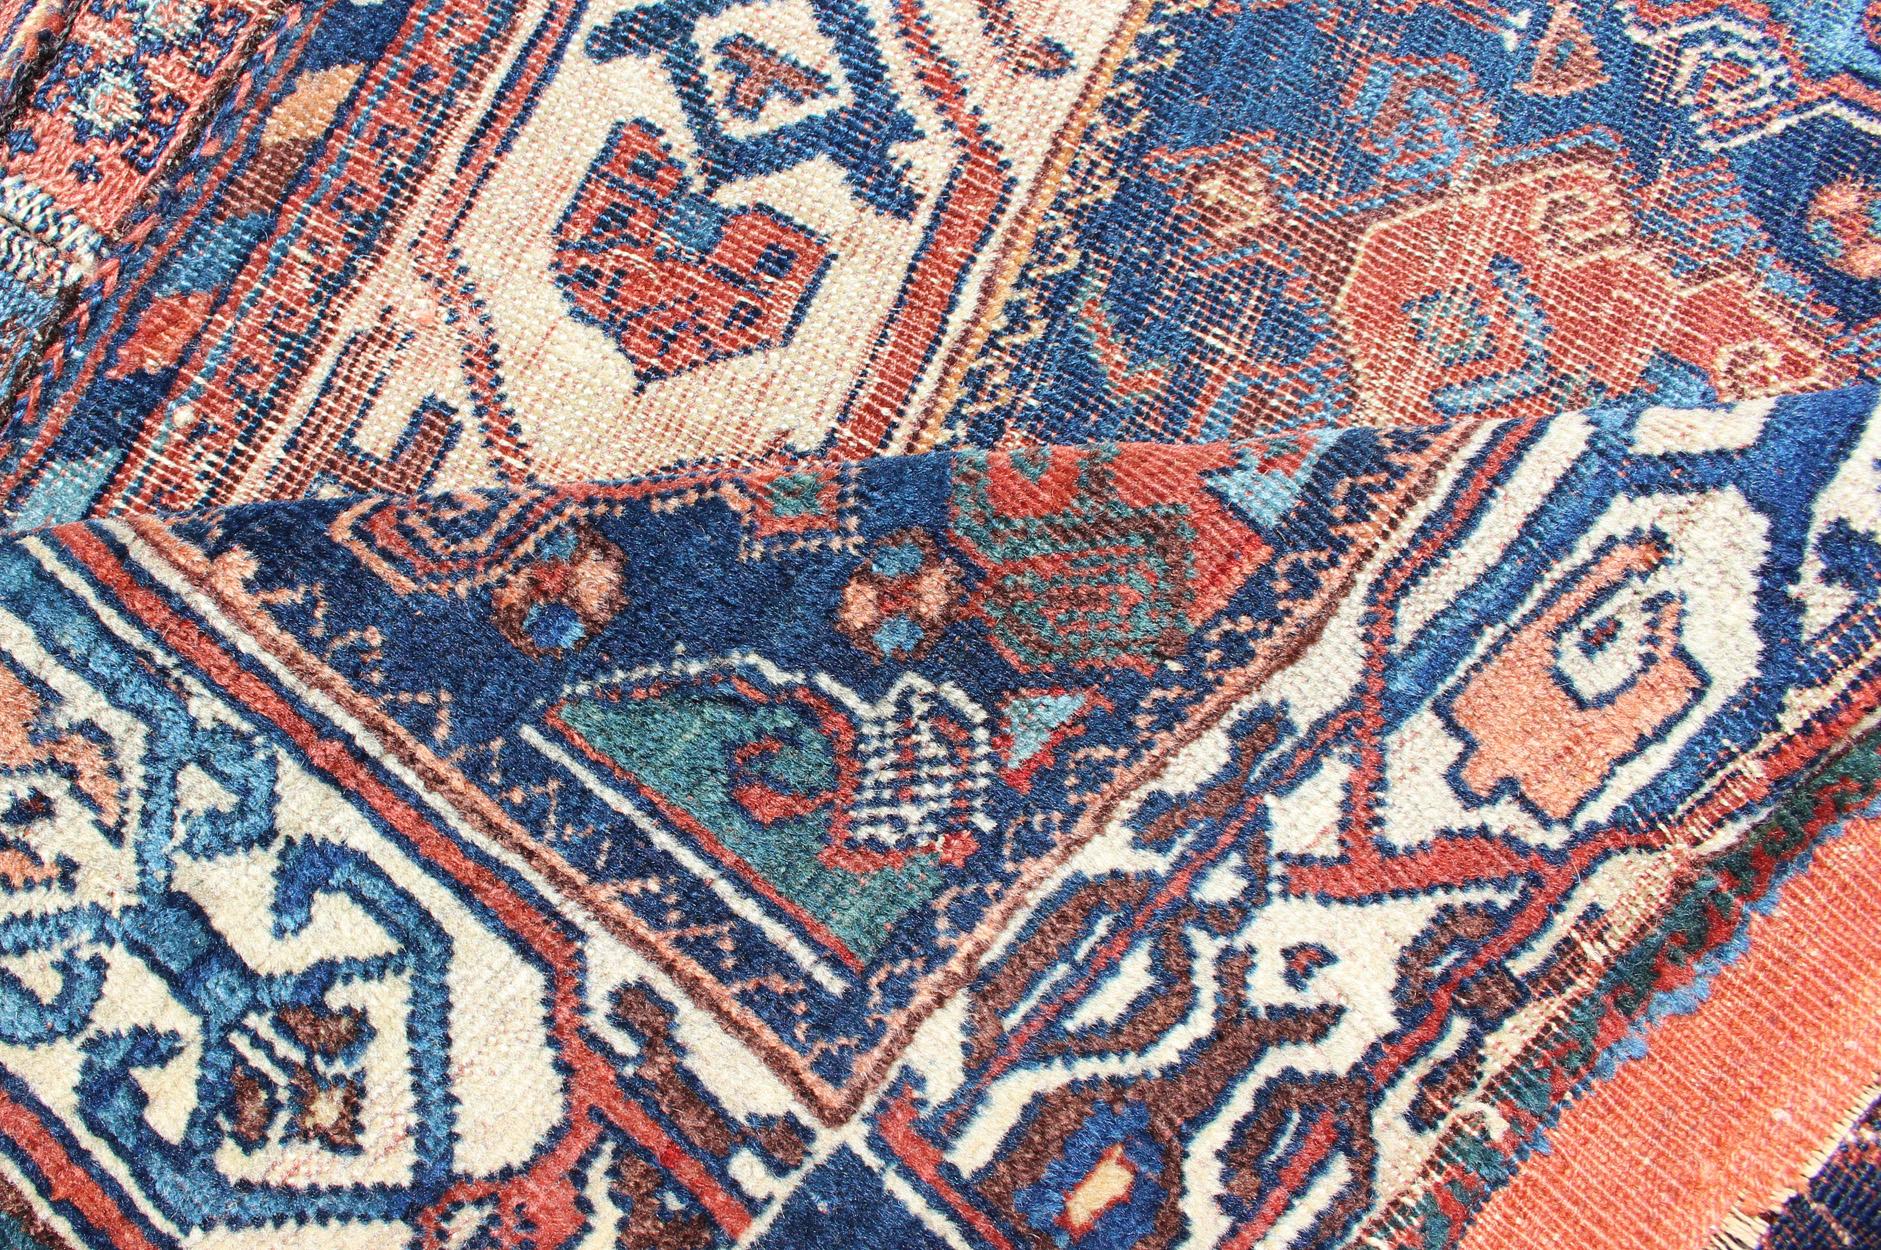 Hand-Knotted Antique Persian Qashqai Rug